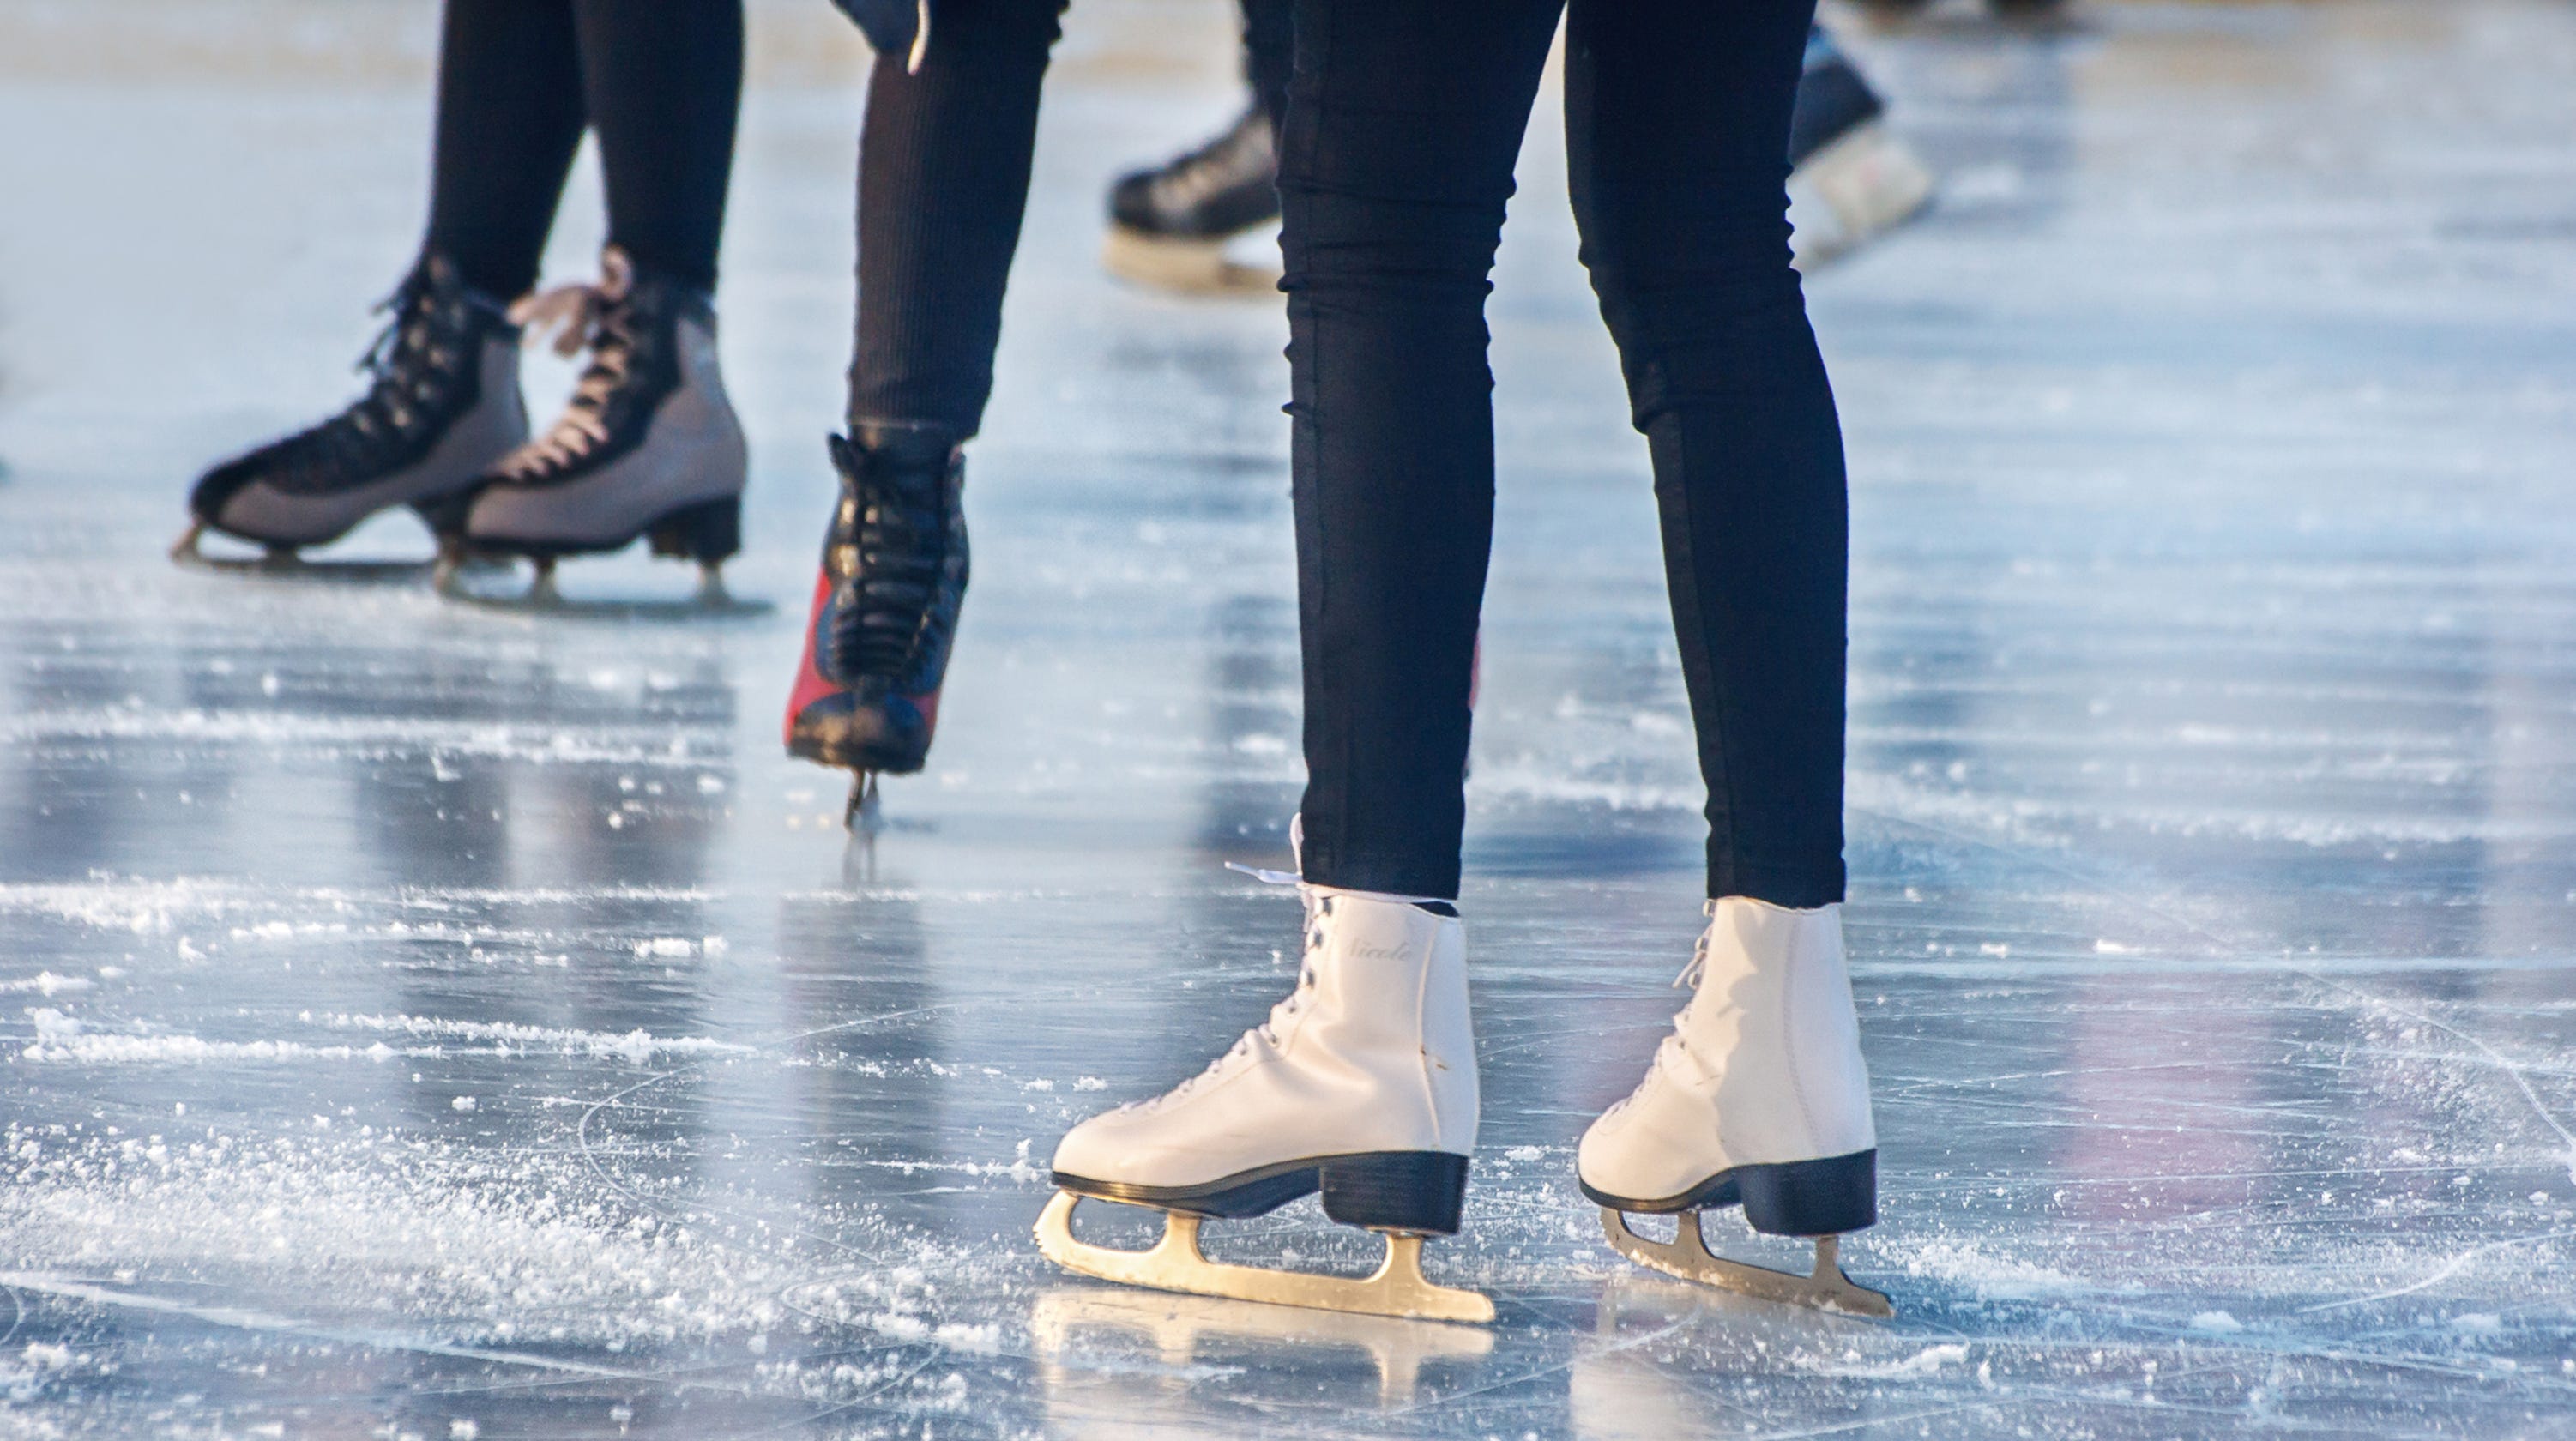 https://discoverthedinosaurs.com/are-ice-skates-the-same-size-as-shoes/